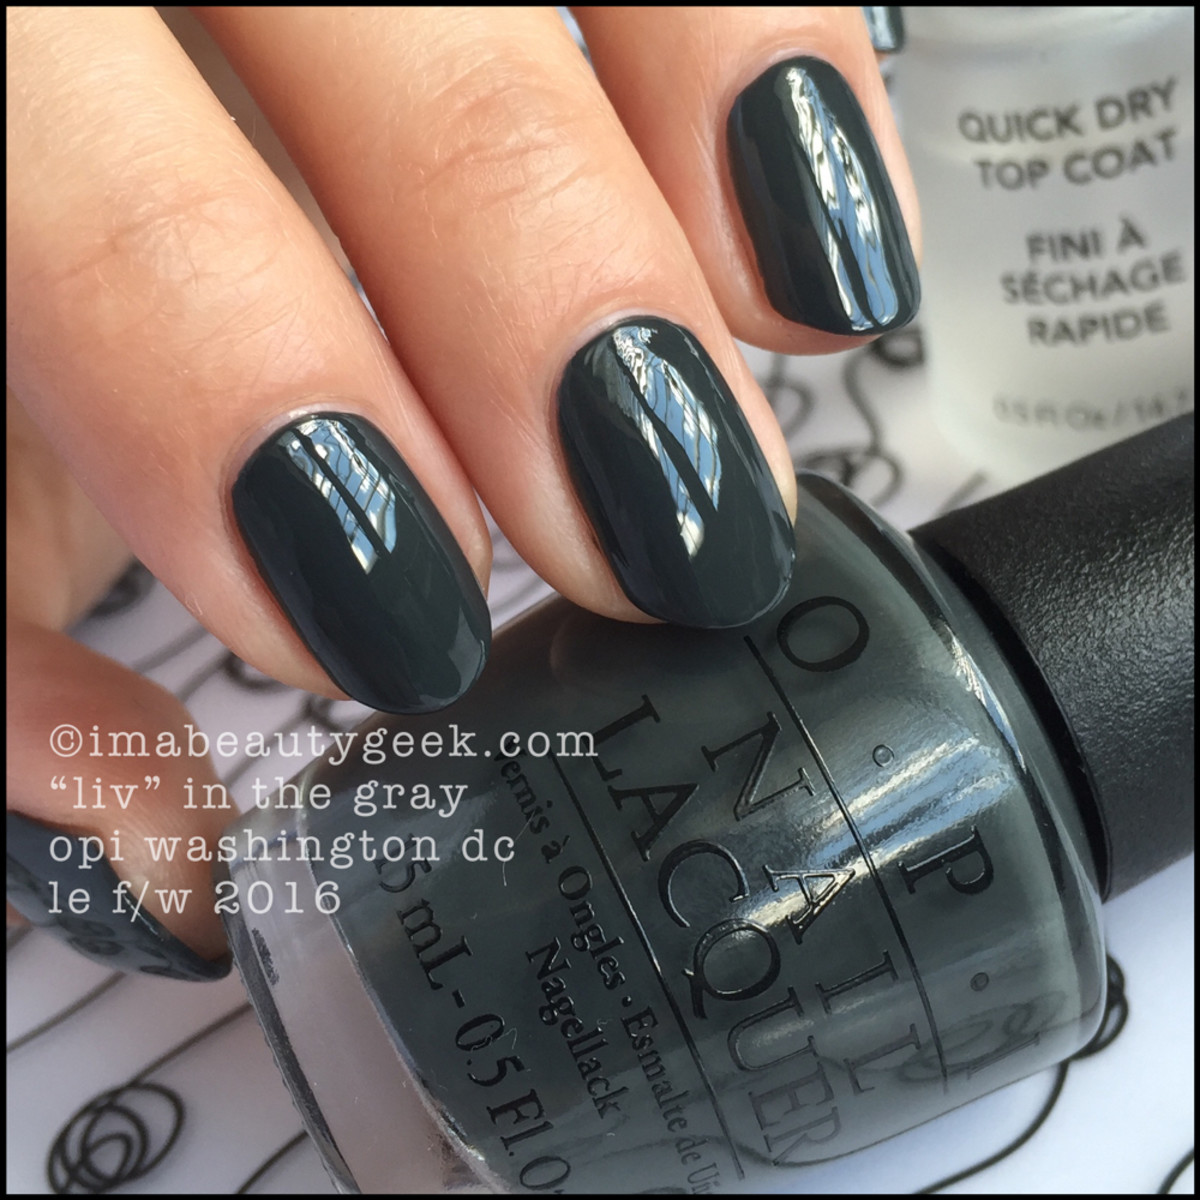 OPI Liv In The Gray Swatches_OPI Kerry Washington DC 2016 Collection Swatches Review